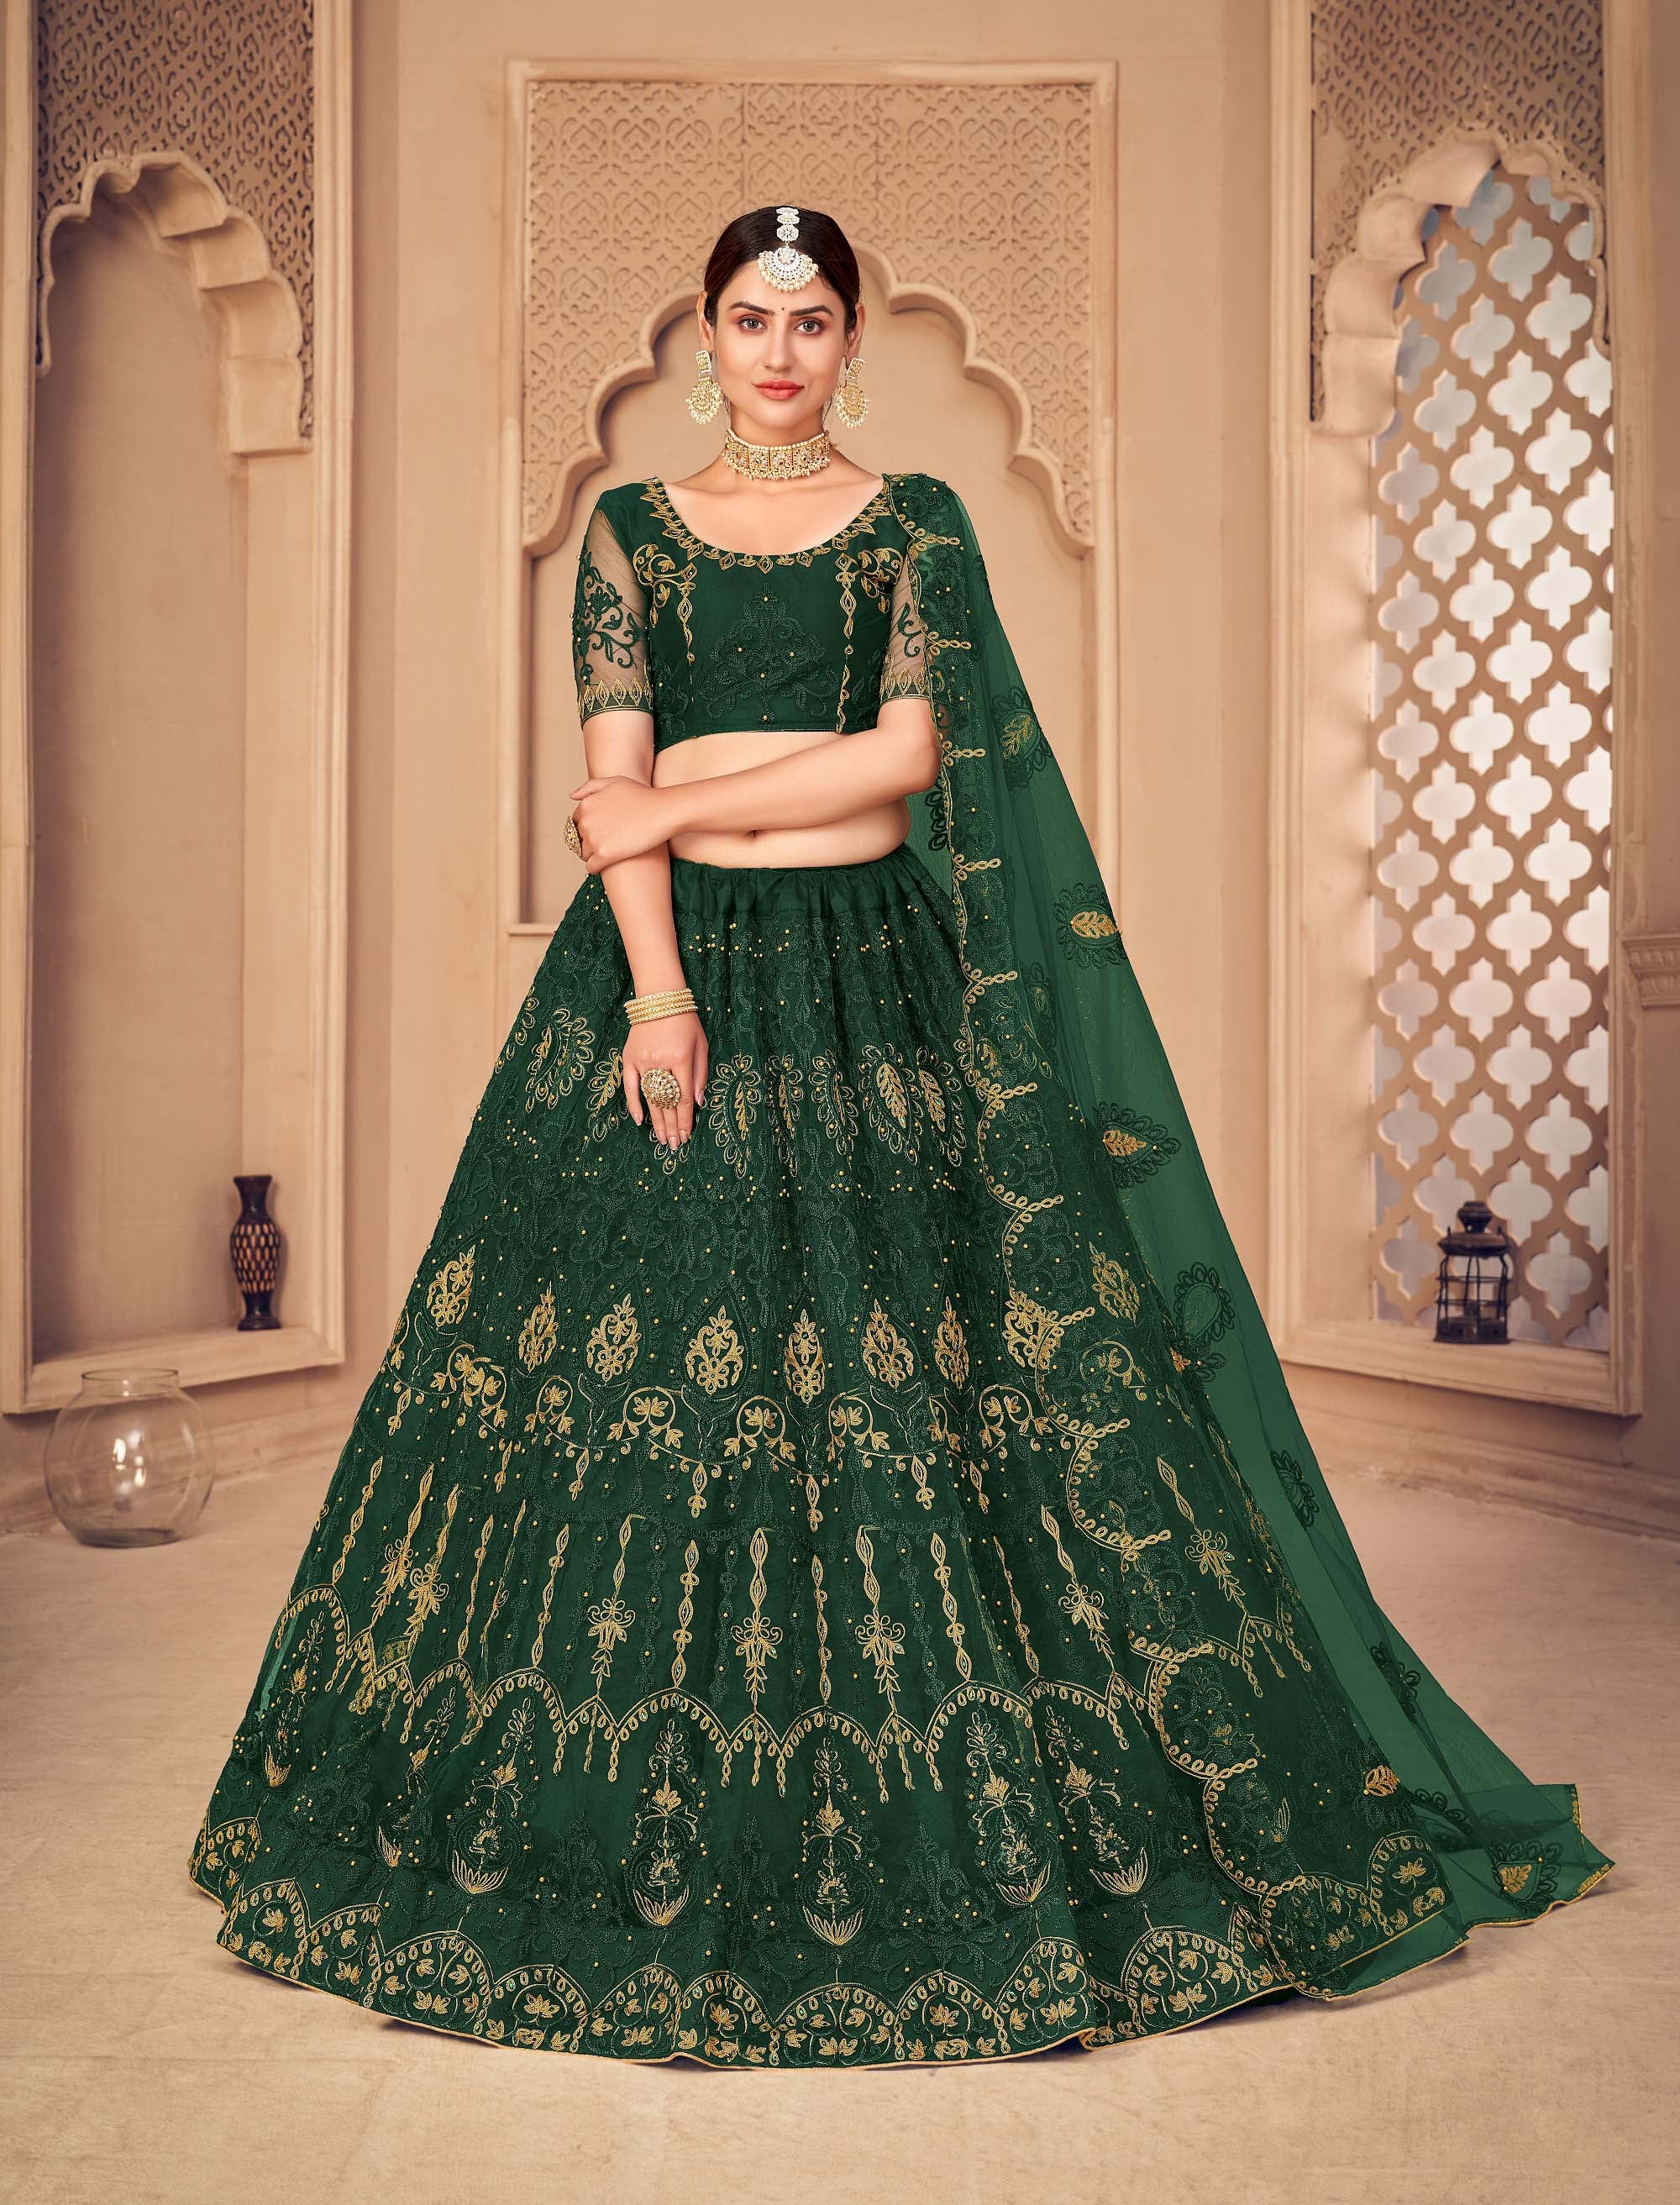 Lehenga Choli For Womens Made By Geogatte Fabric With Sequence 9 mm Work,  Embroi | eBay